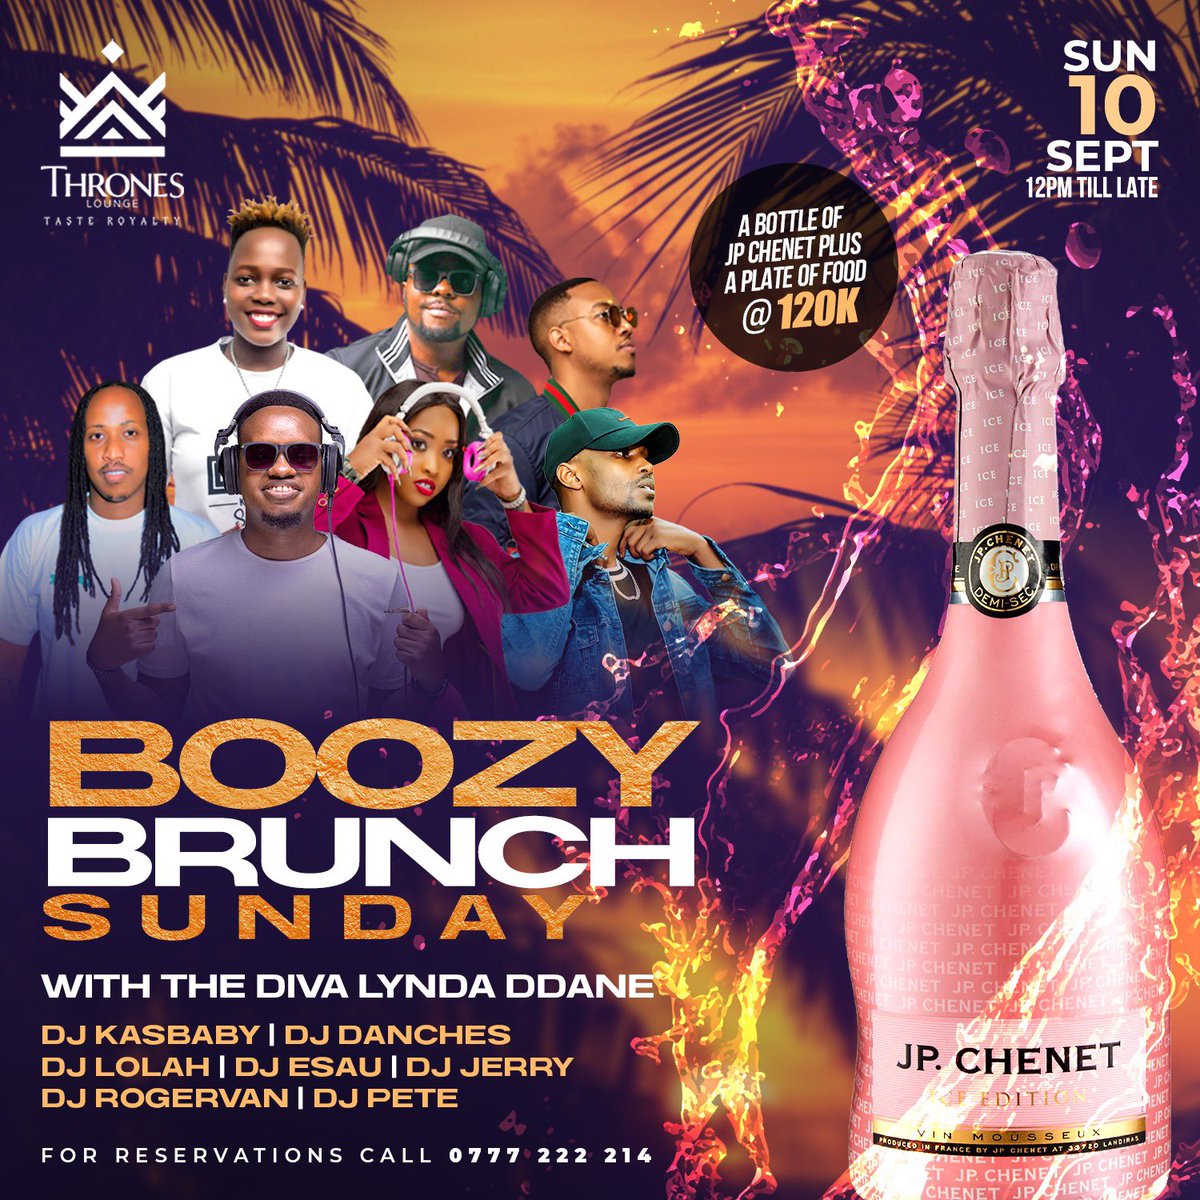 Let’s send off the weekend on a high ☝️ 🔥 note 💯 💪 

#BoozyBrunch @throneskampala 💃